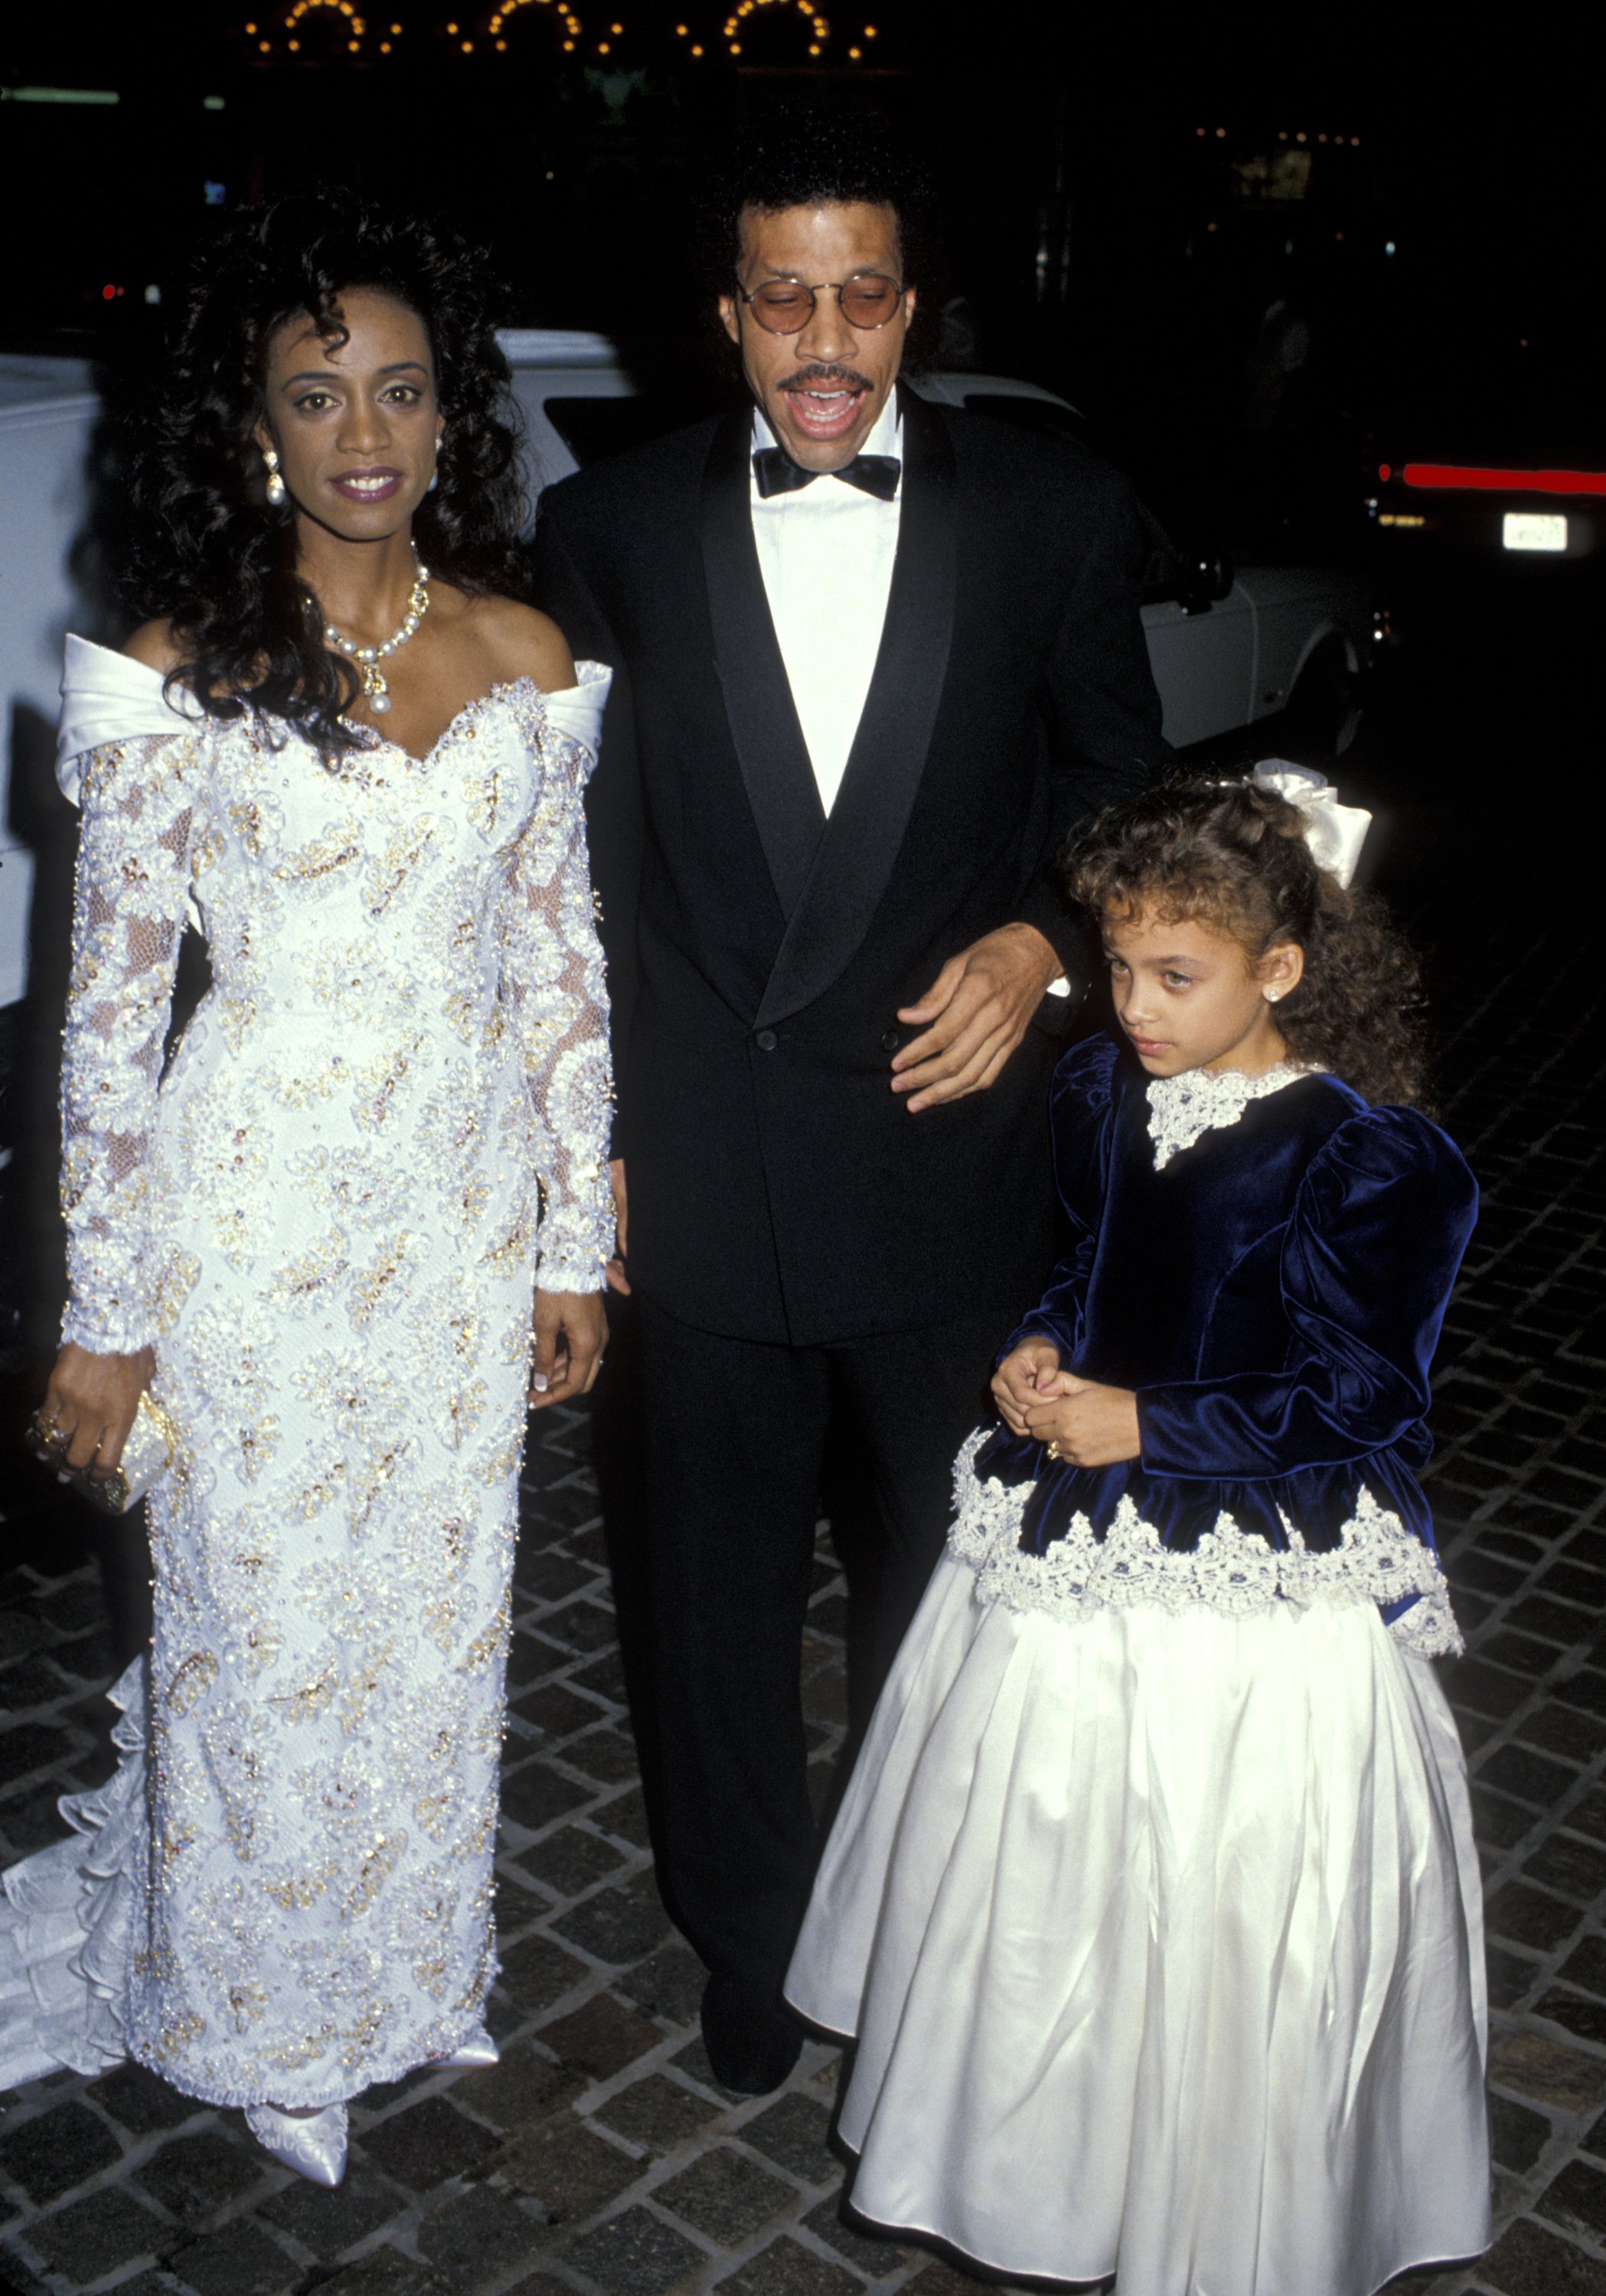 Brenda Harvey, Lionel Richie, and Nicole Richie at the Beverly Hilton Hotel in Beverly Hills, California. / Source: Getty Images